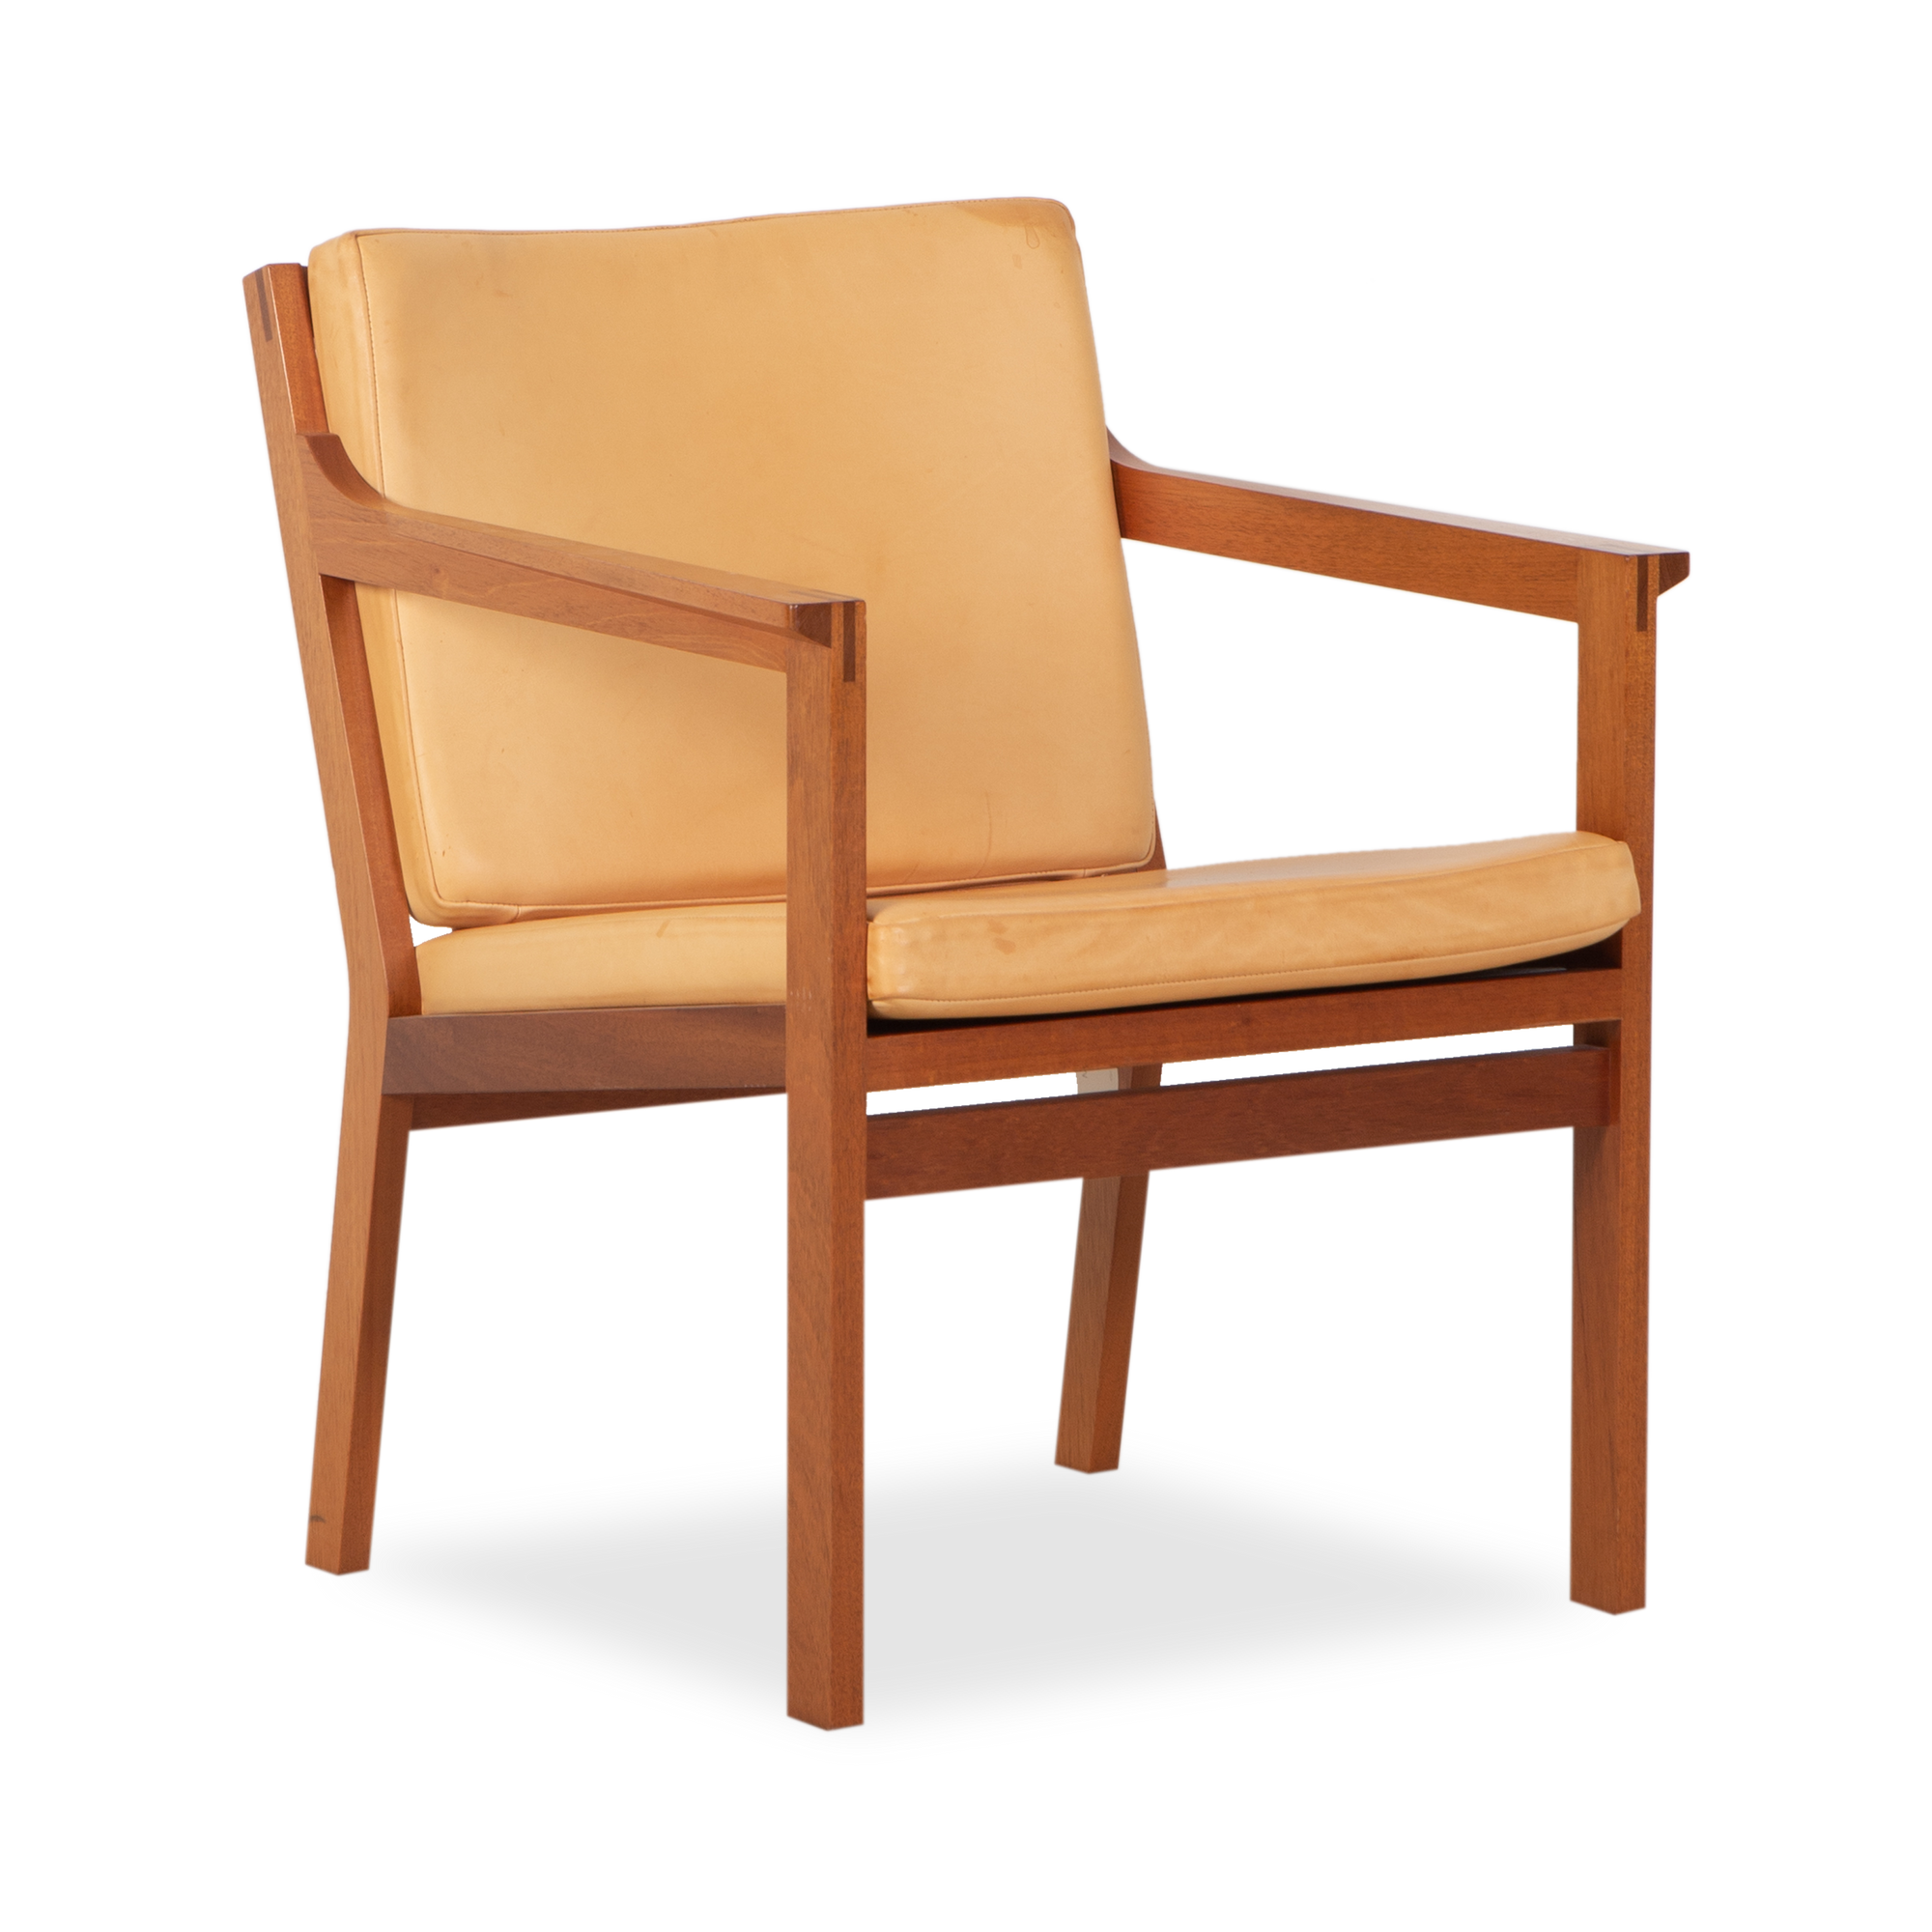 Clean and elegant, this vintage leather armchair was designed by Christian Hvidt for Soborg Mobler, circa 1980s.